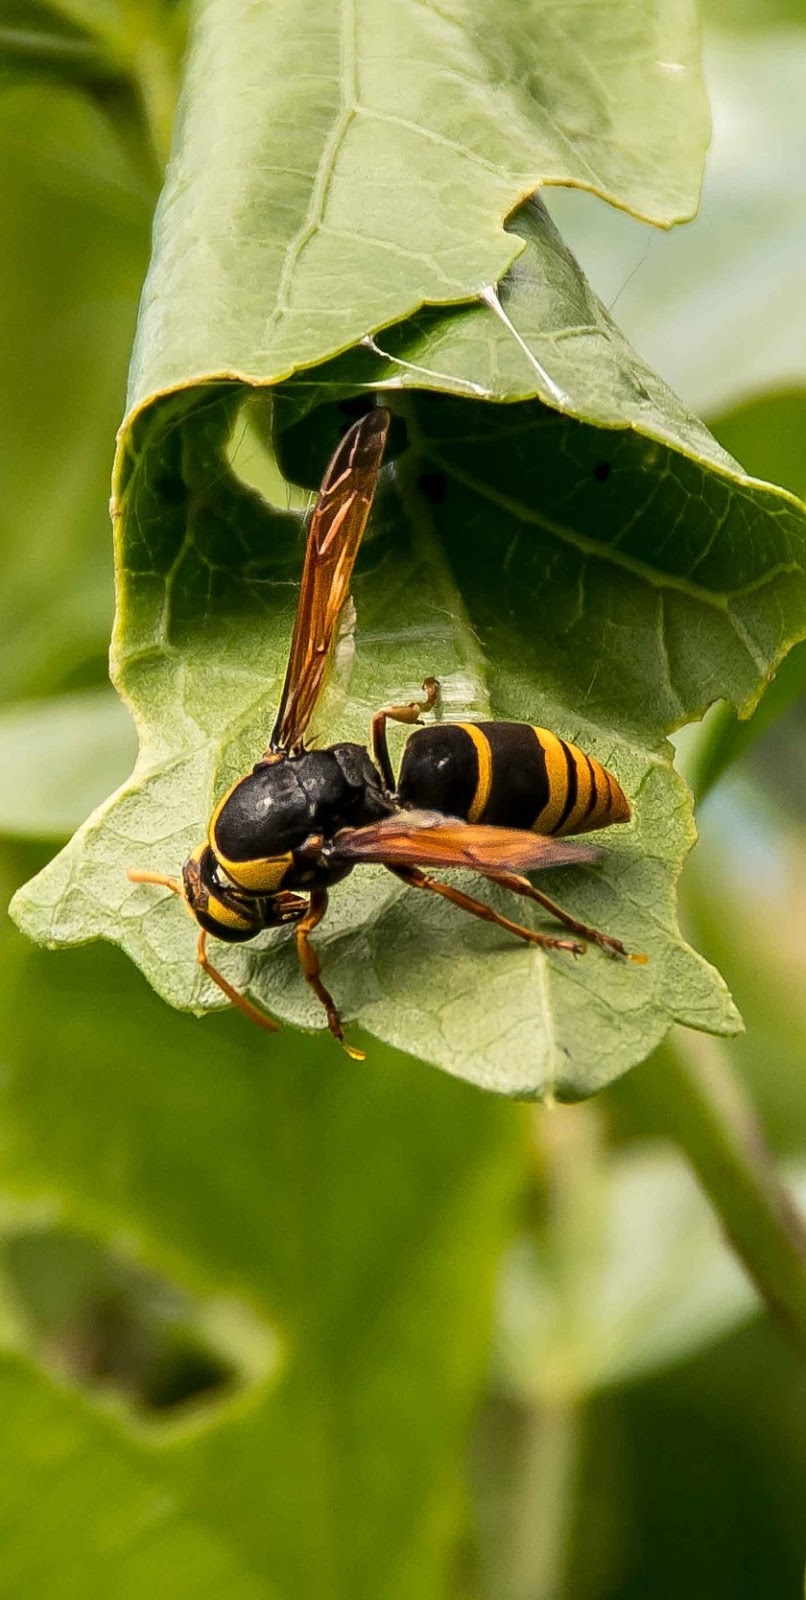 A wasp using a plant leaf a nest.